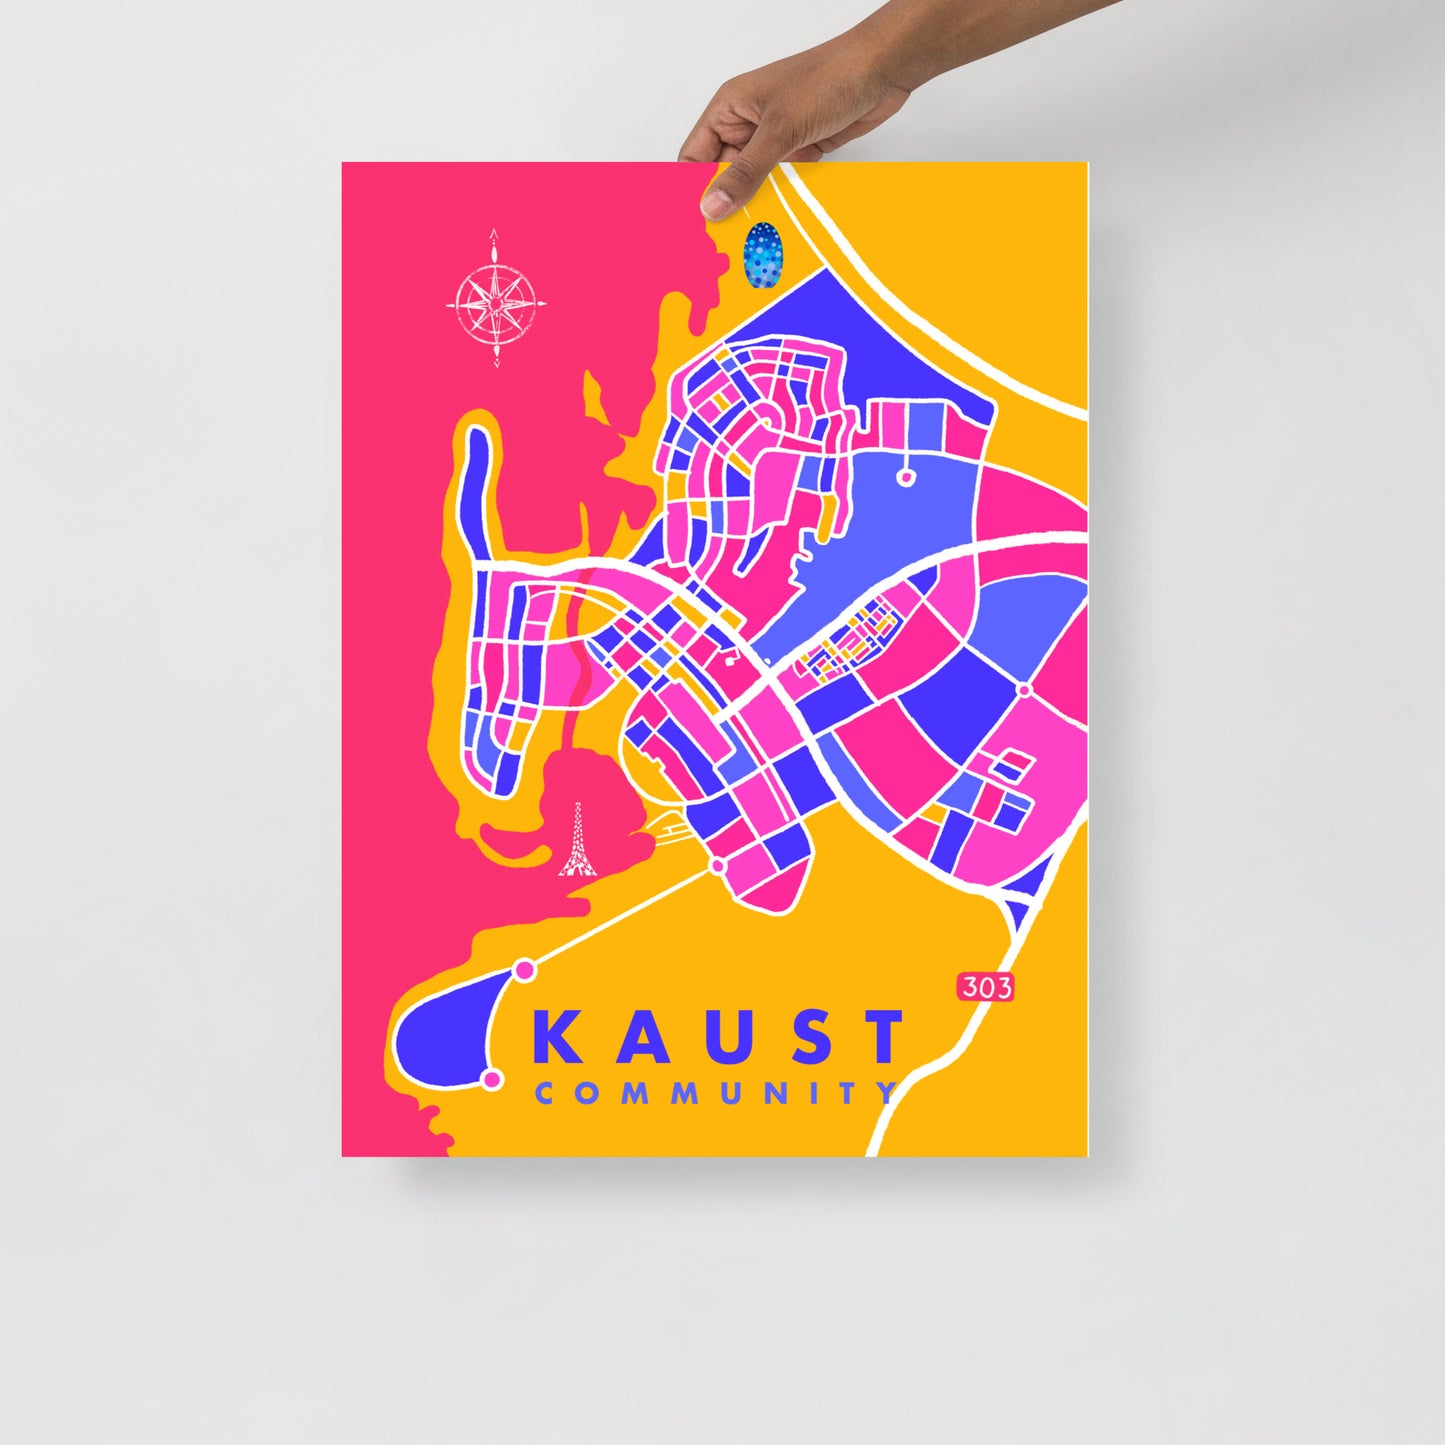 KAUST Community Map Art Poster in pink and yellow